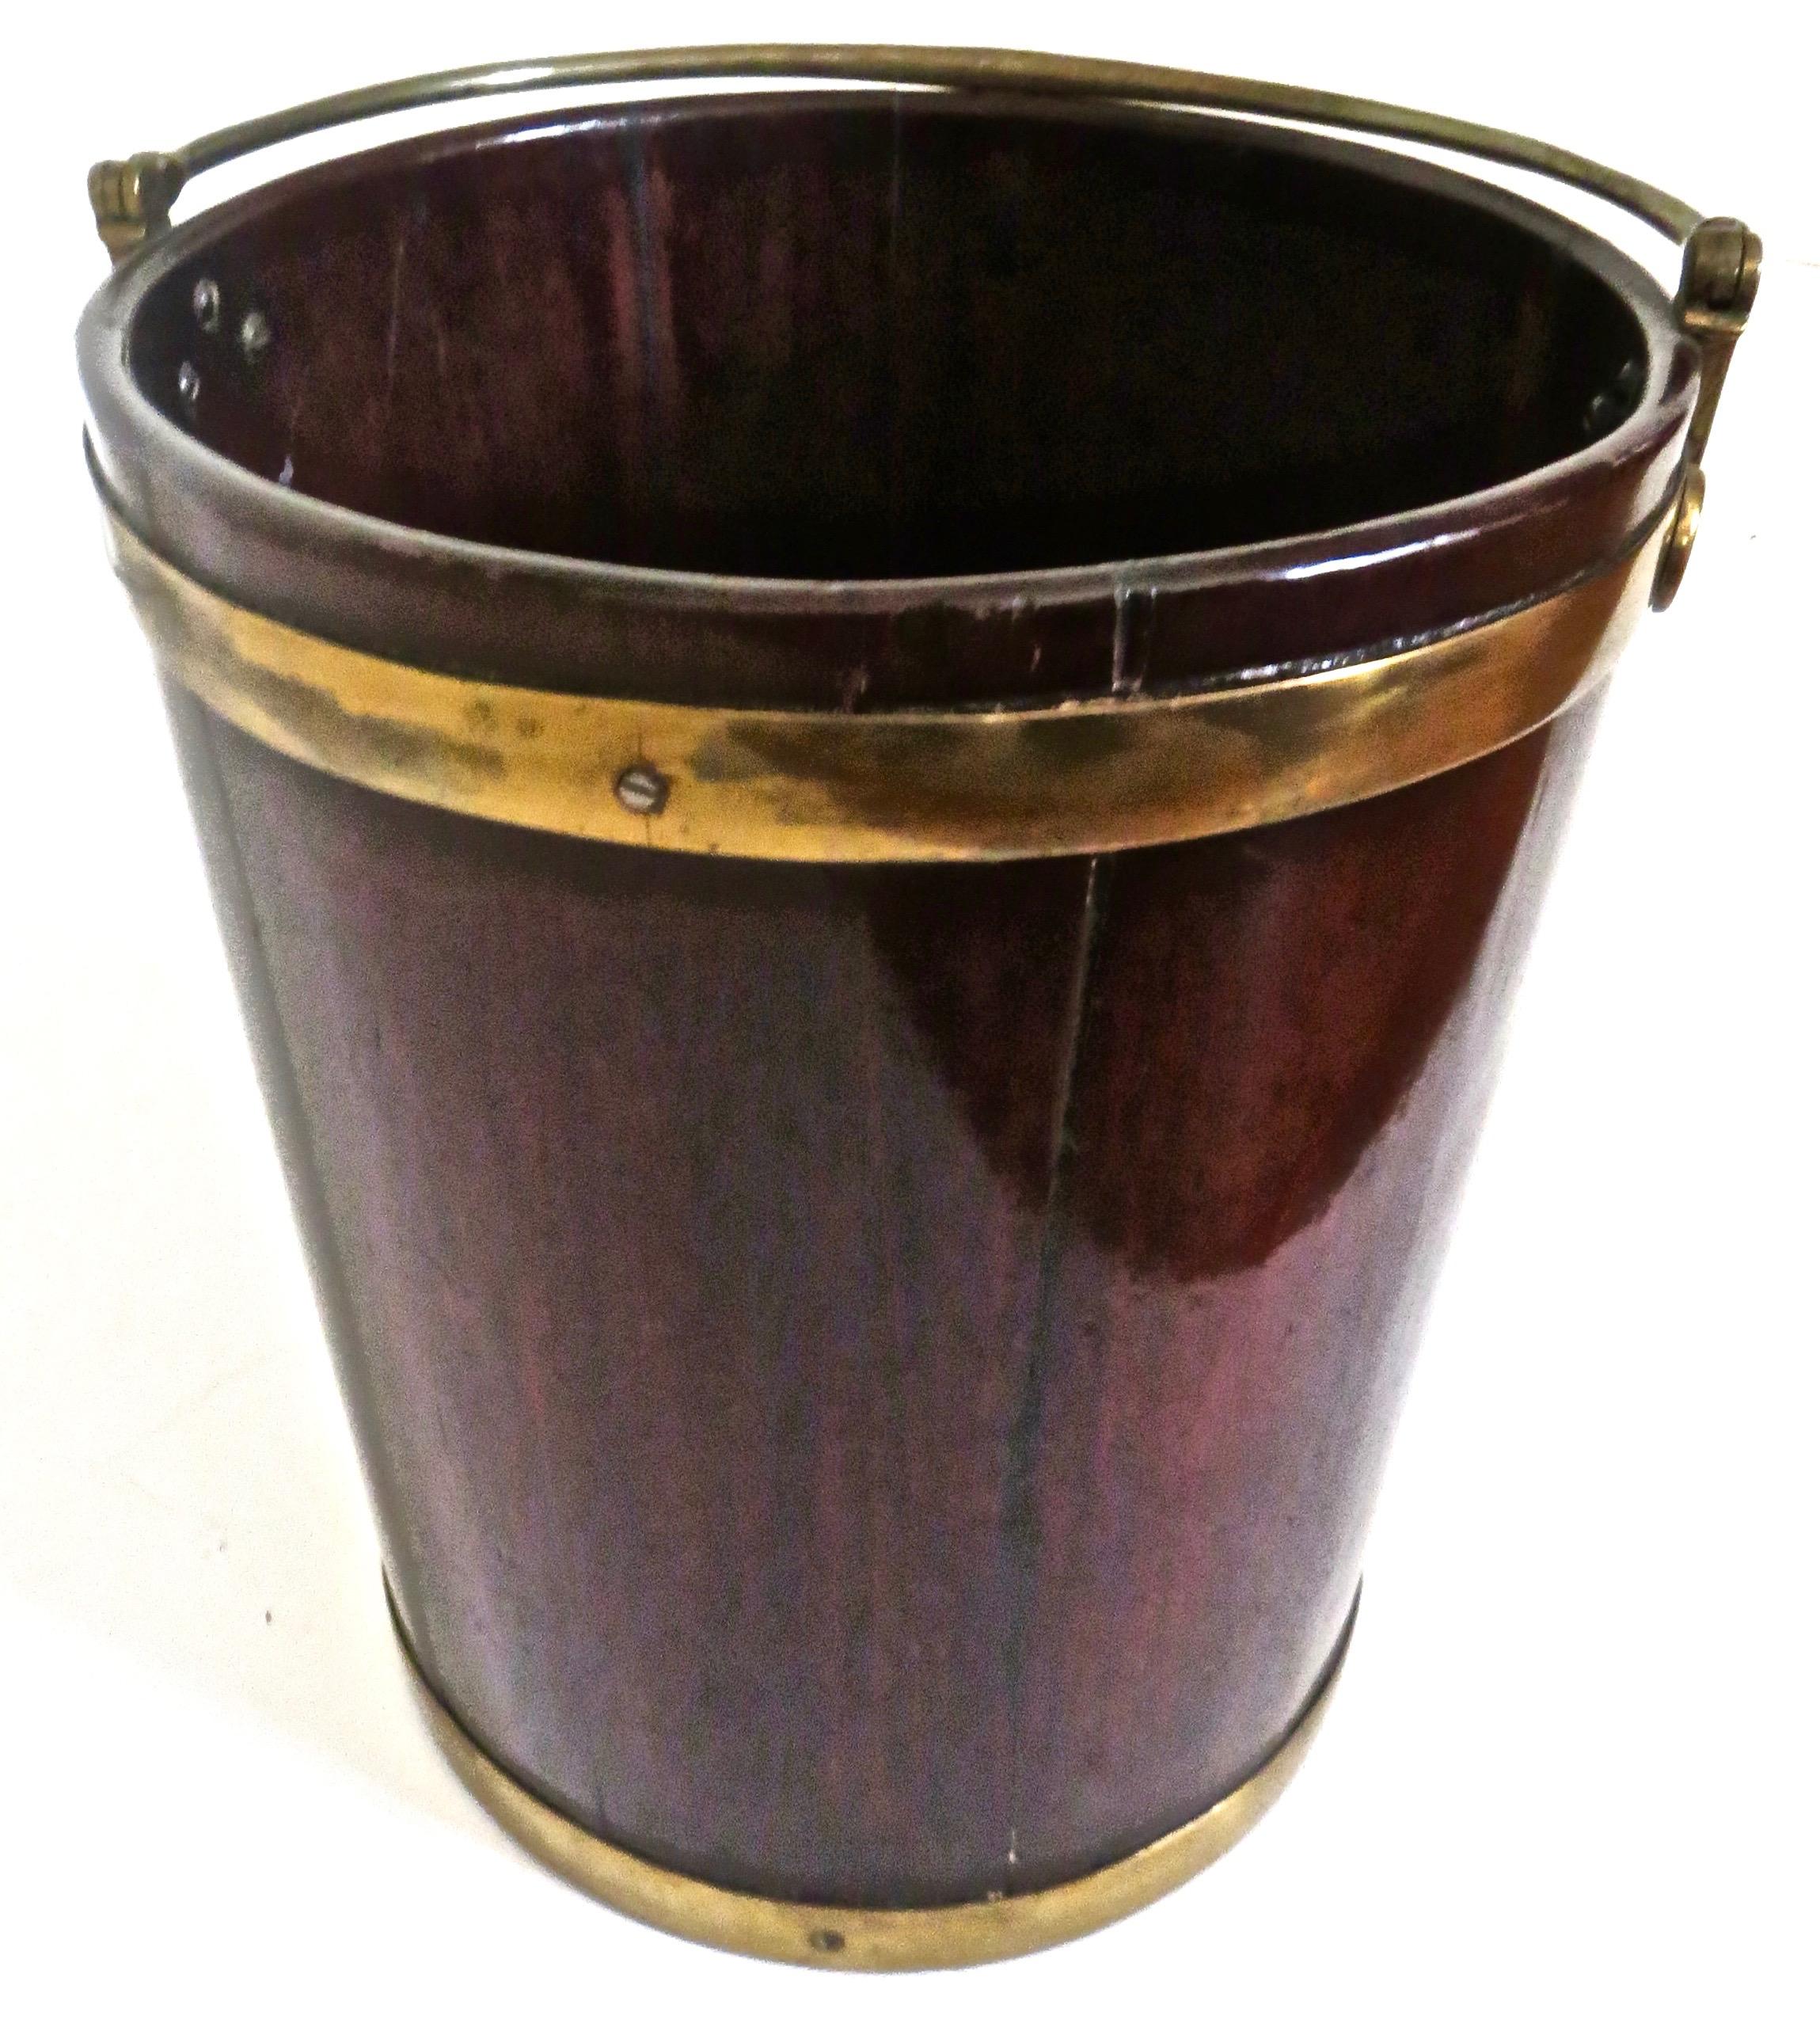 Pair of George III Mahogany Brass-Bound Buckets; 1 Peat and 1 Plate, English 6